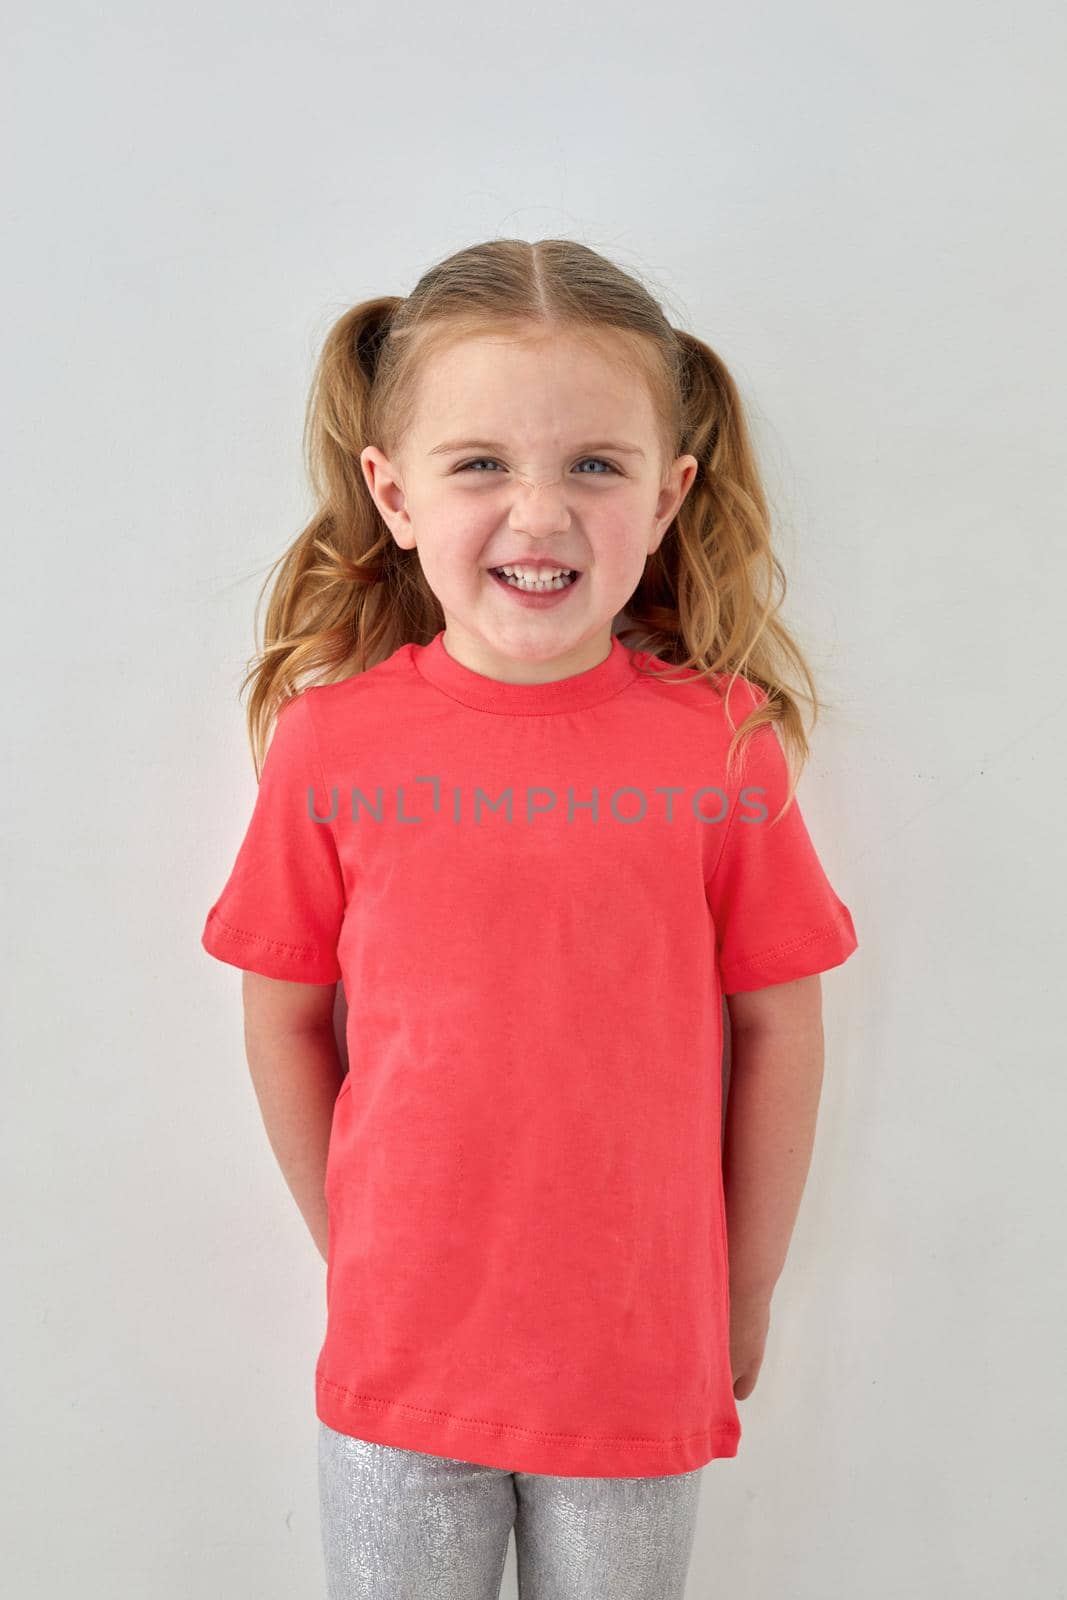 Adorable cheerful little girl with ponytails wearing pink t shirt standing on white background and looking at camera with smile